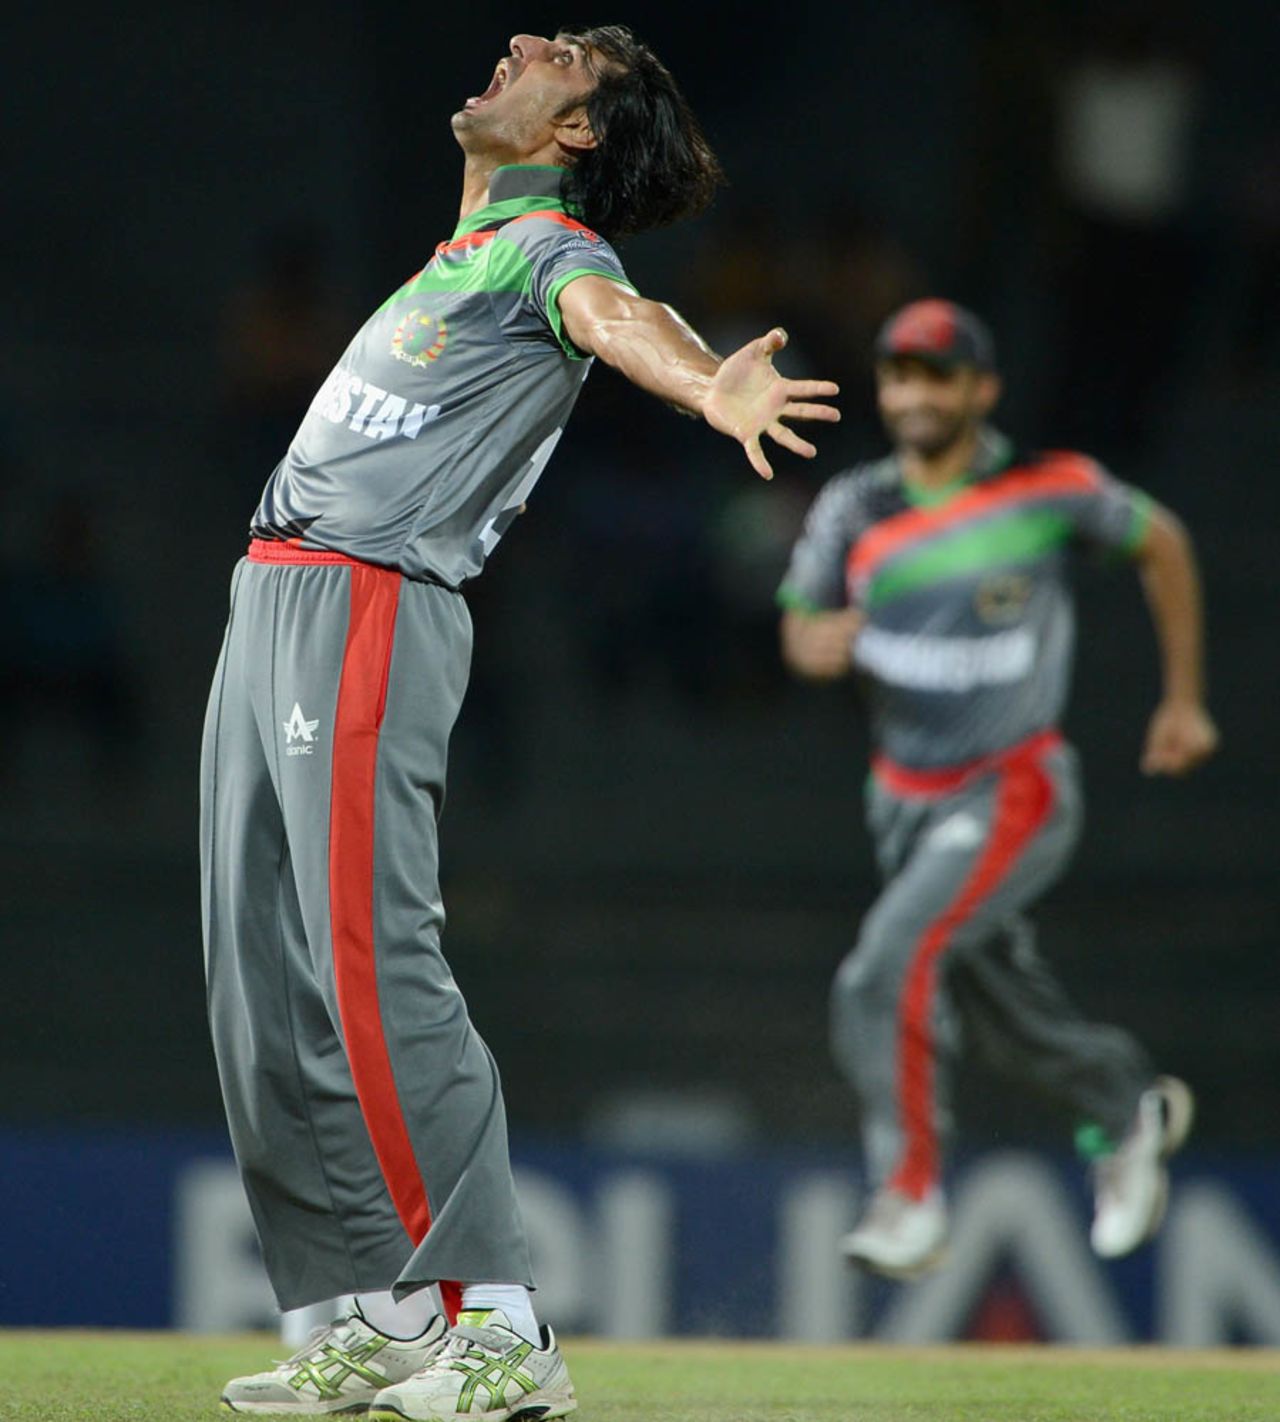 Shapoor Zadran reacts after taking the wicket of Craig Kieswetter, Afghanistan v England, World Twenty20 2012, Group A, Colombo, September 21, 2012